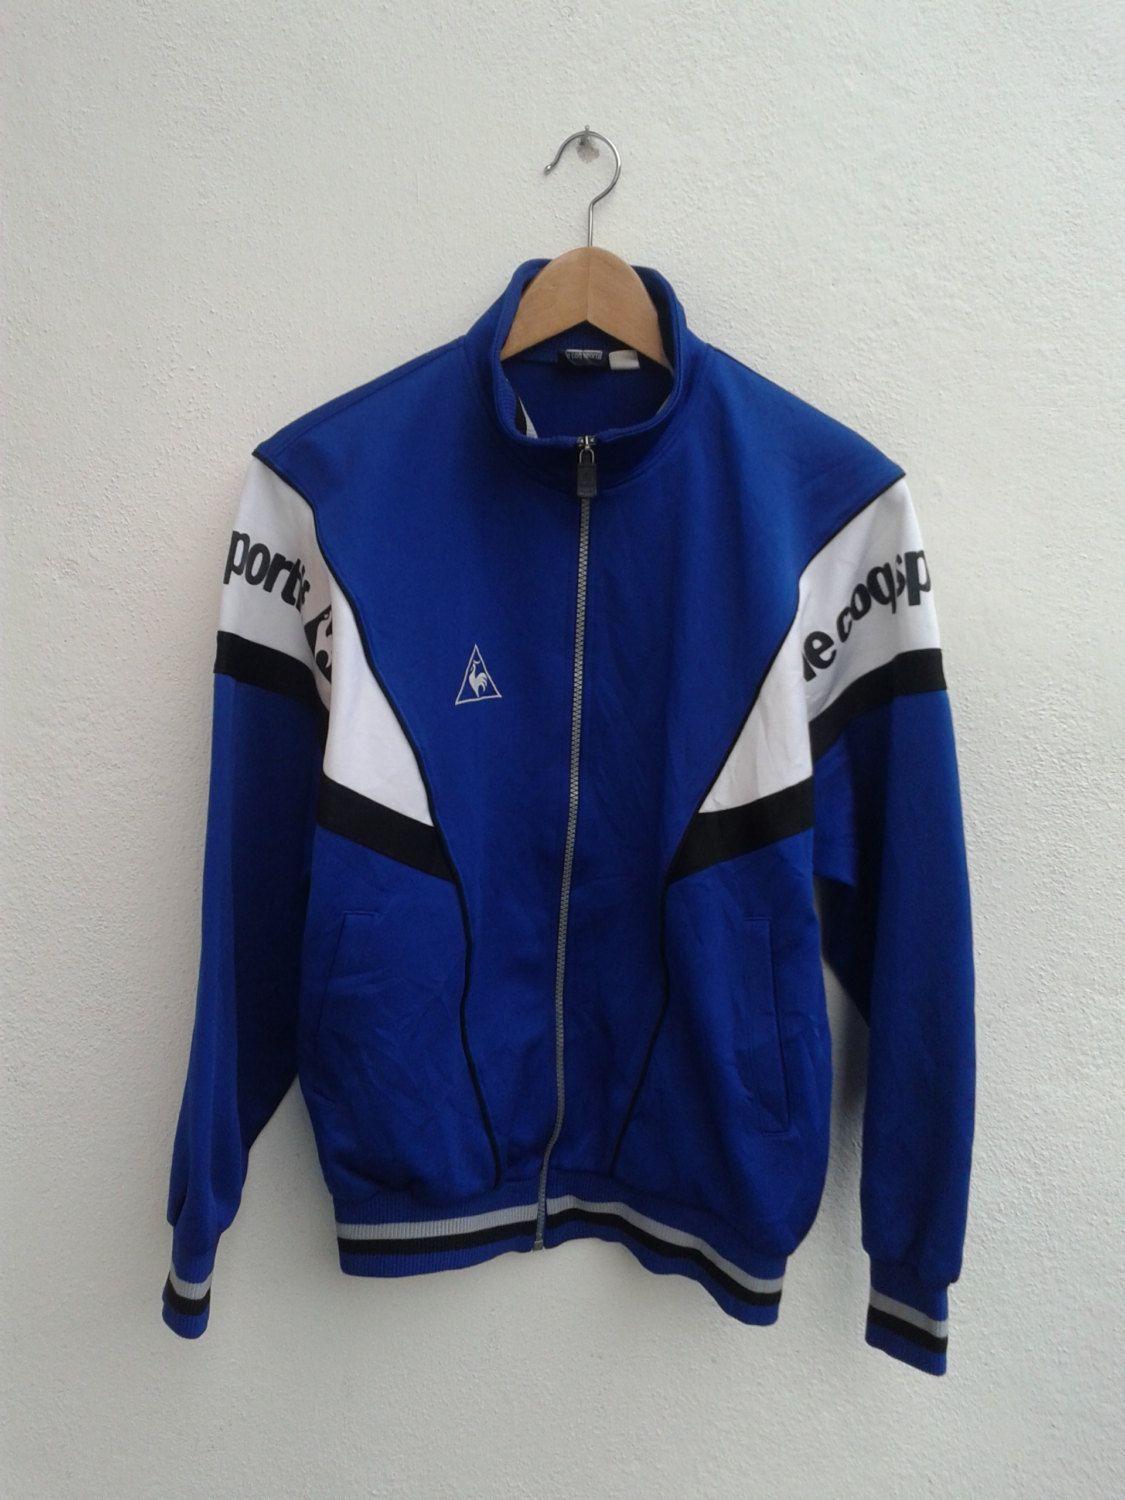 Blue Rooster in Triangle Logo - LE Coq Sportif Track And Feild Sportswear Jacket Vintage 90s Rooster ...